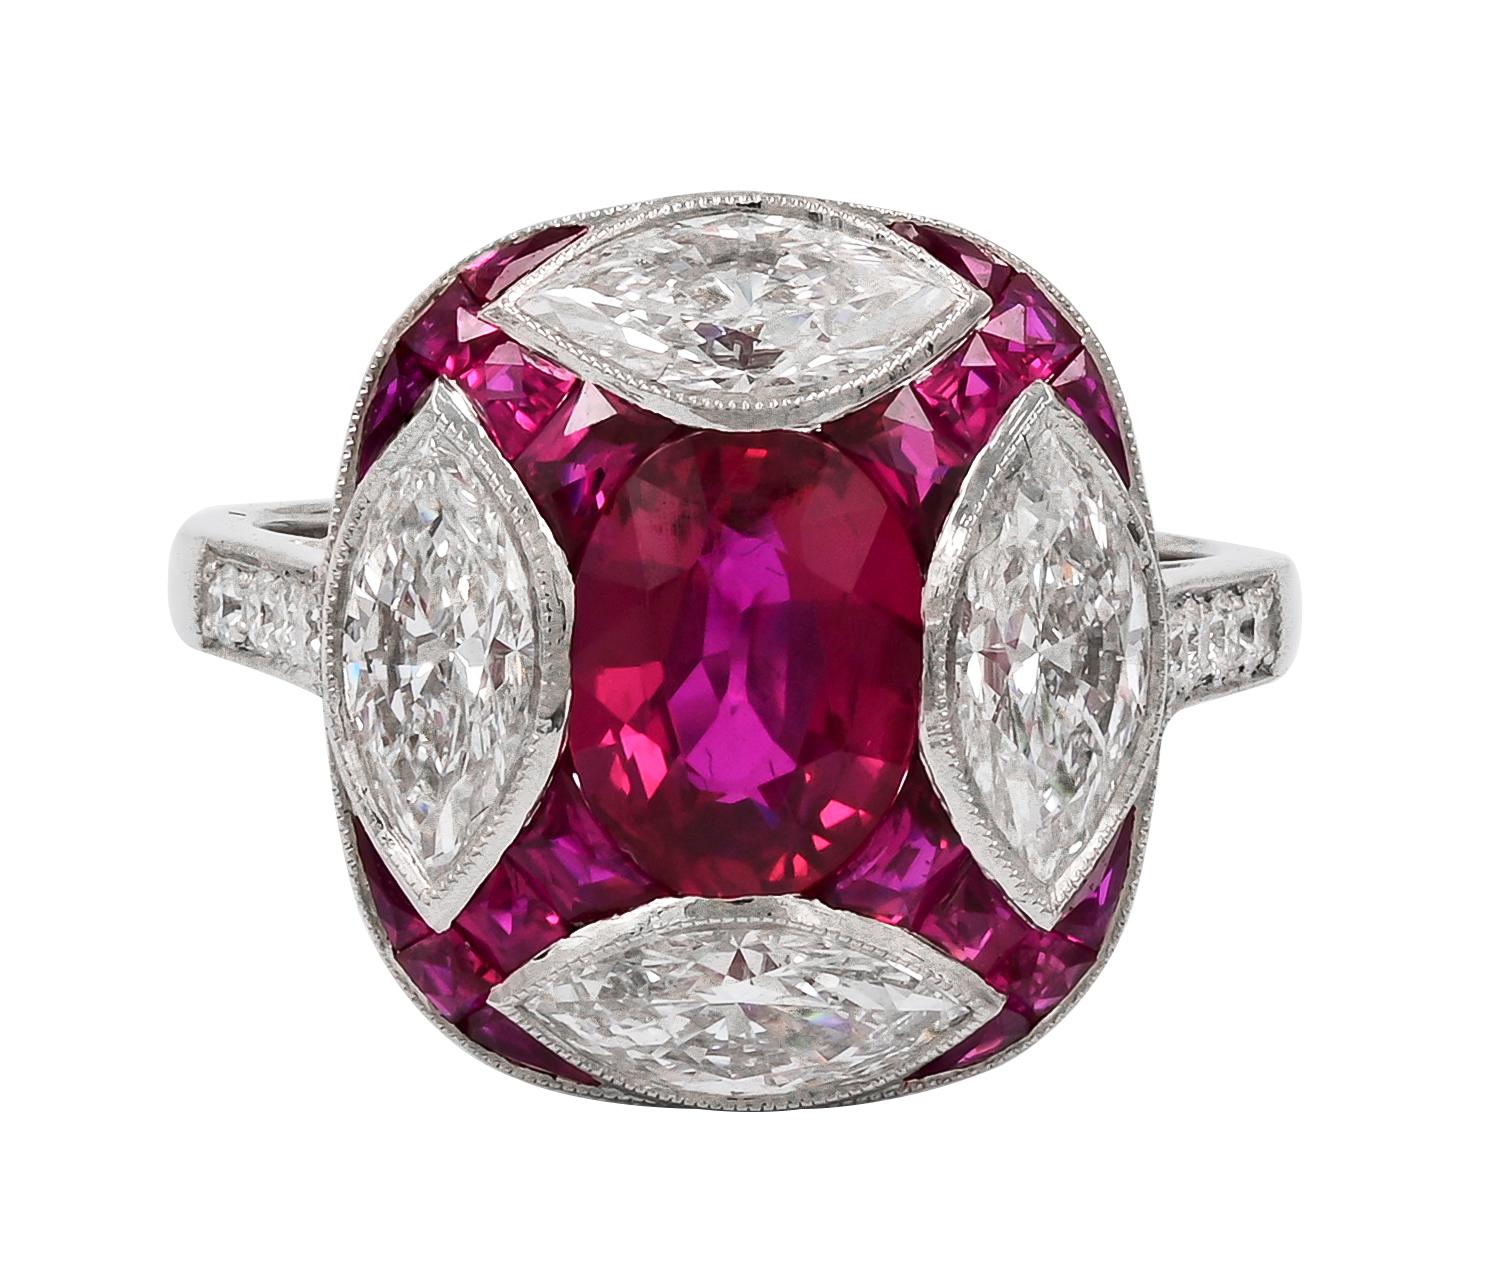 The platinum Art Deco style ring by Sophia D features a total of 1.51 carats rubies and 4 marquise cut diamonds that weigh a total of 1.85 carats and .37 carats of small round diamonds. Also available for resizing.

Sophia D by Joseph Dardashti LTD